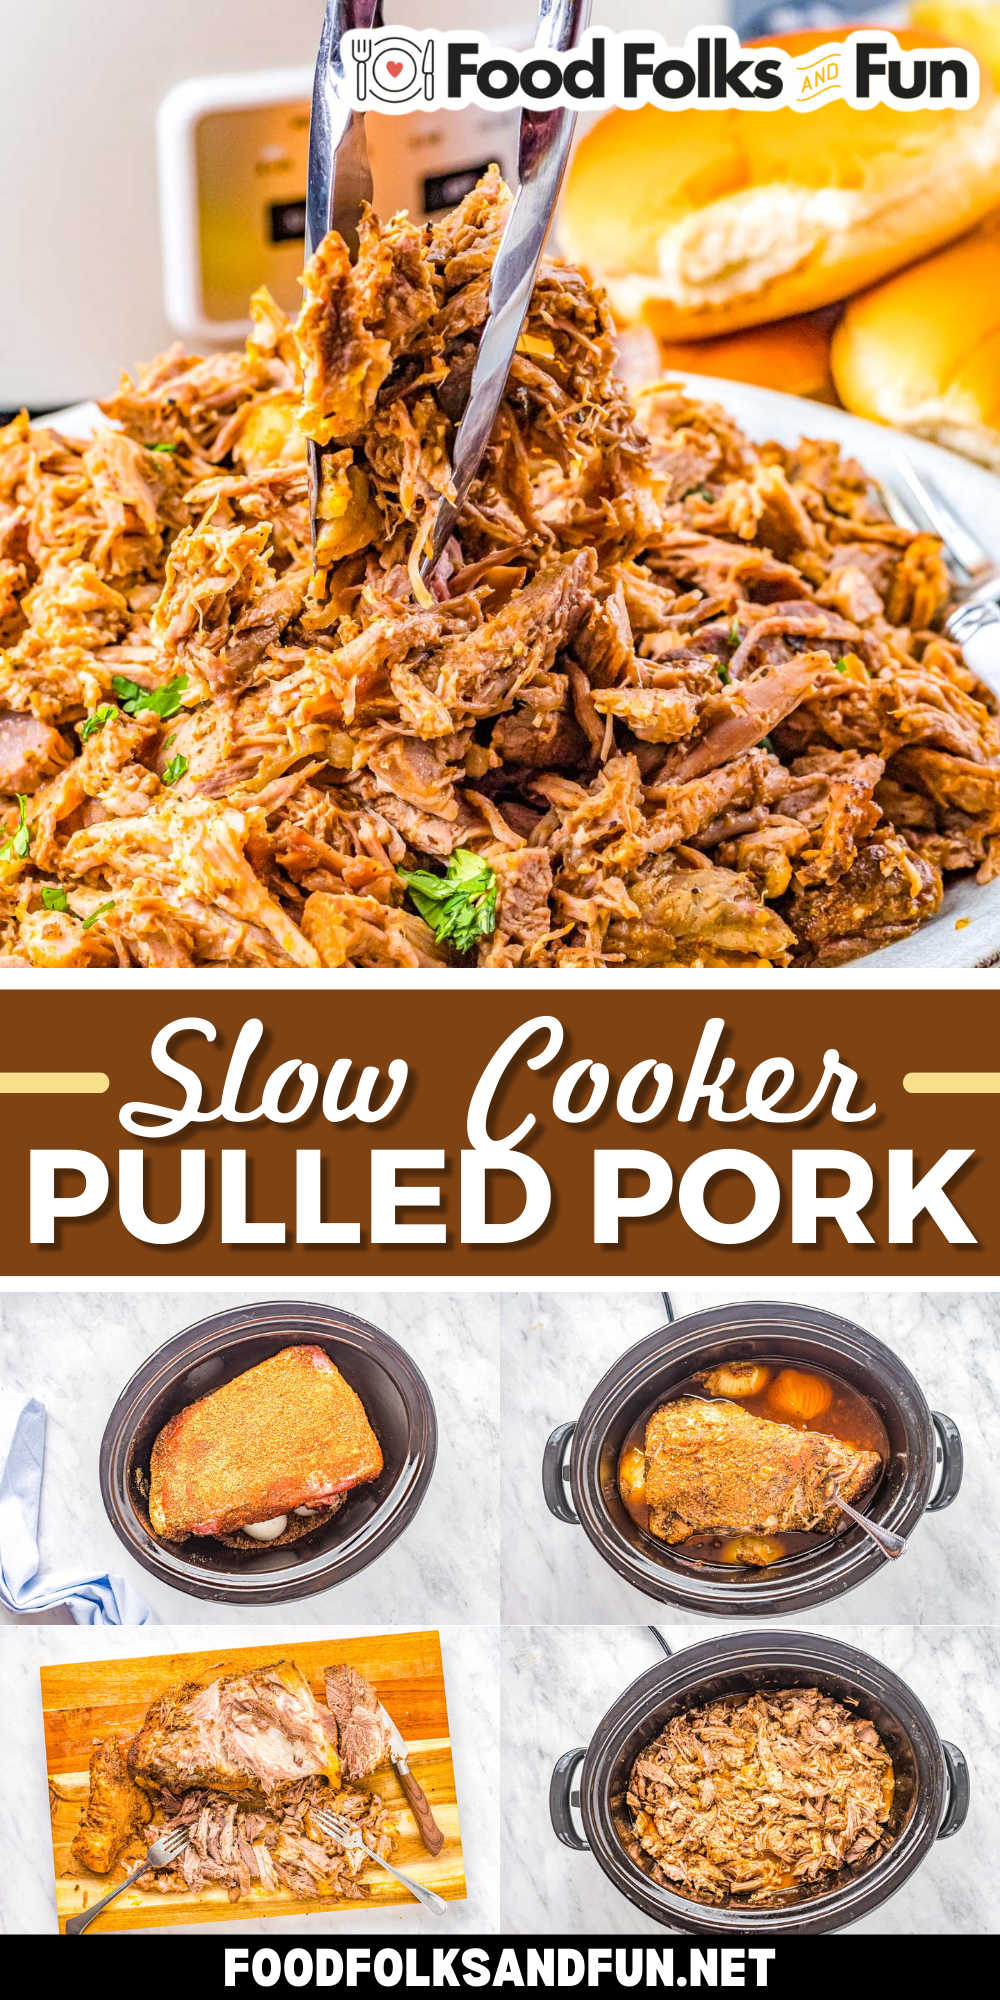 Slow Cooker Pulled Pork couldn’t get easier than this recipe. First, season it up and let it cook. Then shred it and serve it with your favorite side dishes or make it into tacos or sandwiches! via @foodfolksandfun